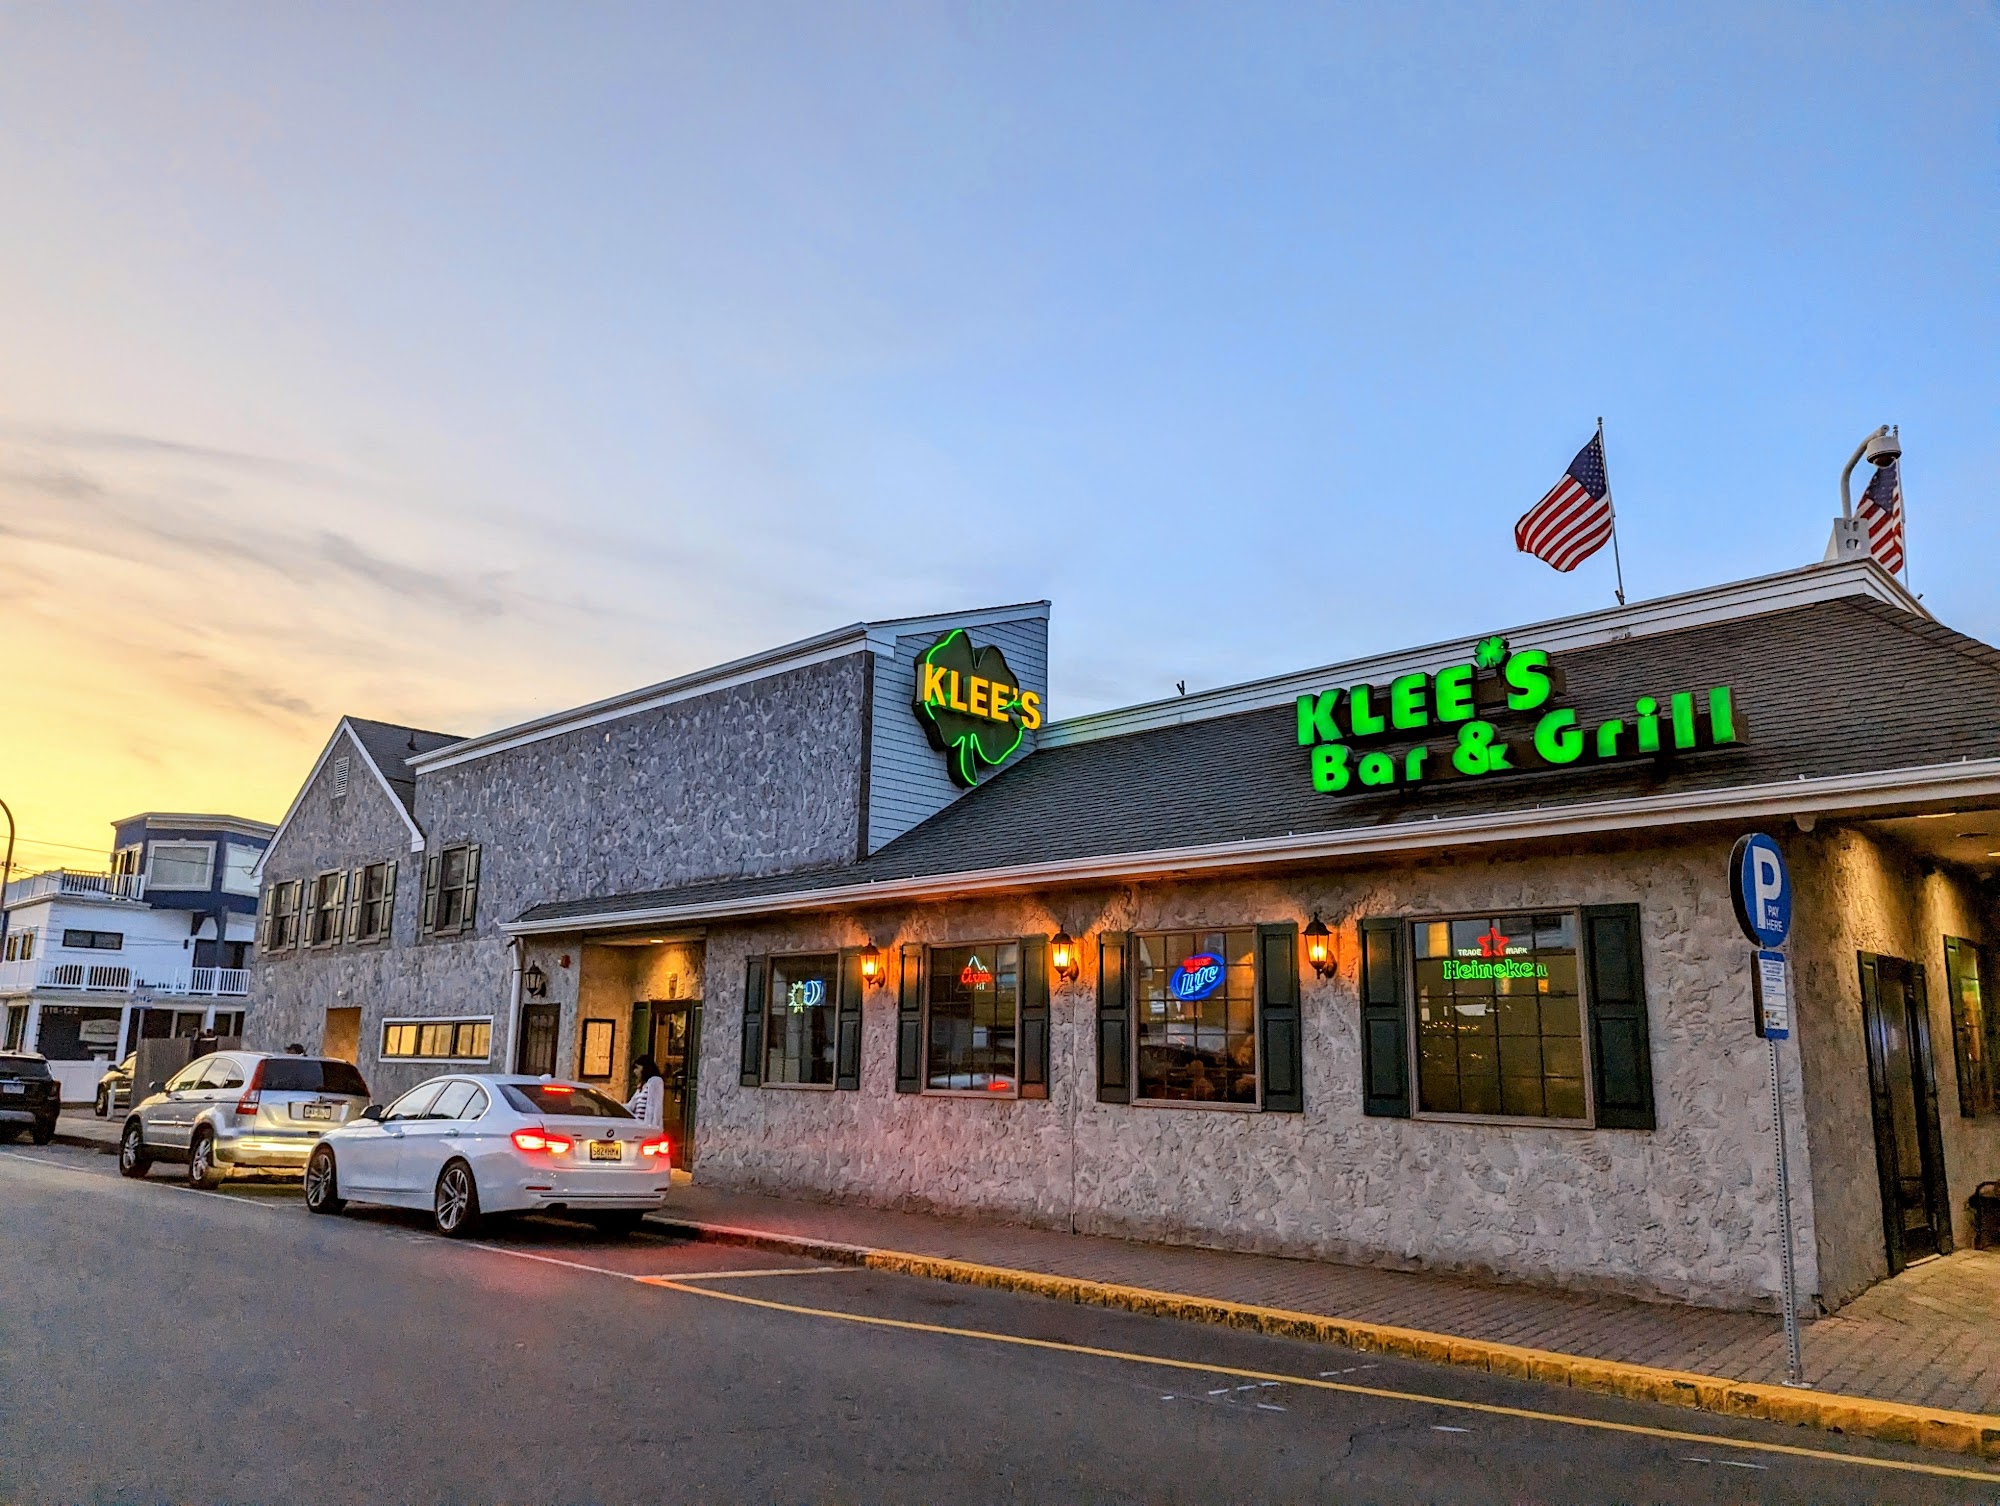 Klee's Bar & Grill